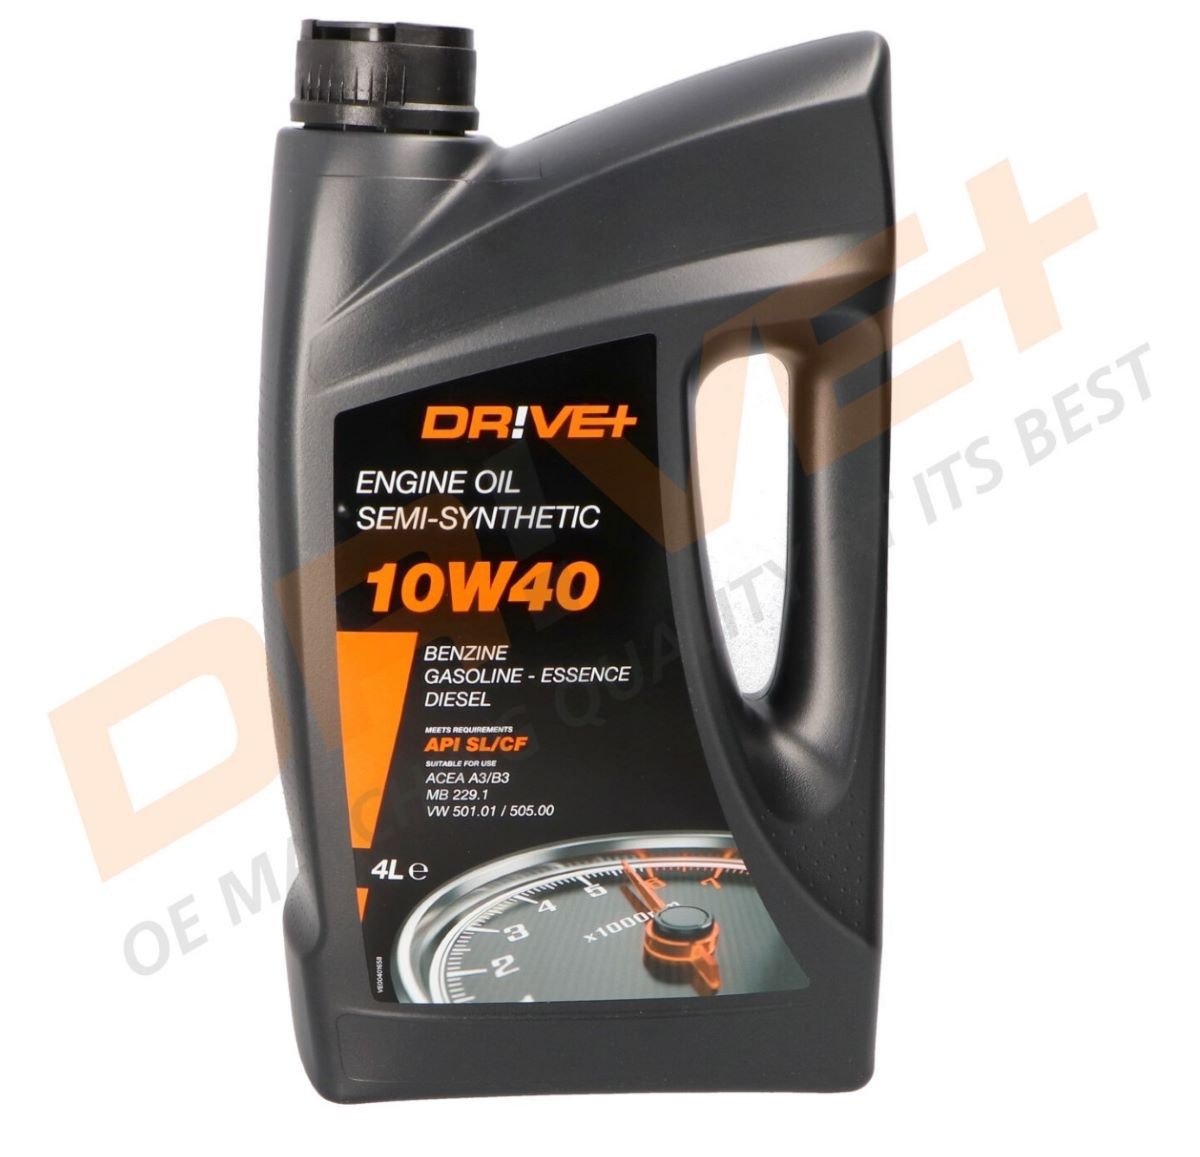 DP3310.10.041 Dr!ve+ Oil FORD 10W-40, 4l, Full Synthetic Oil